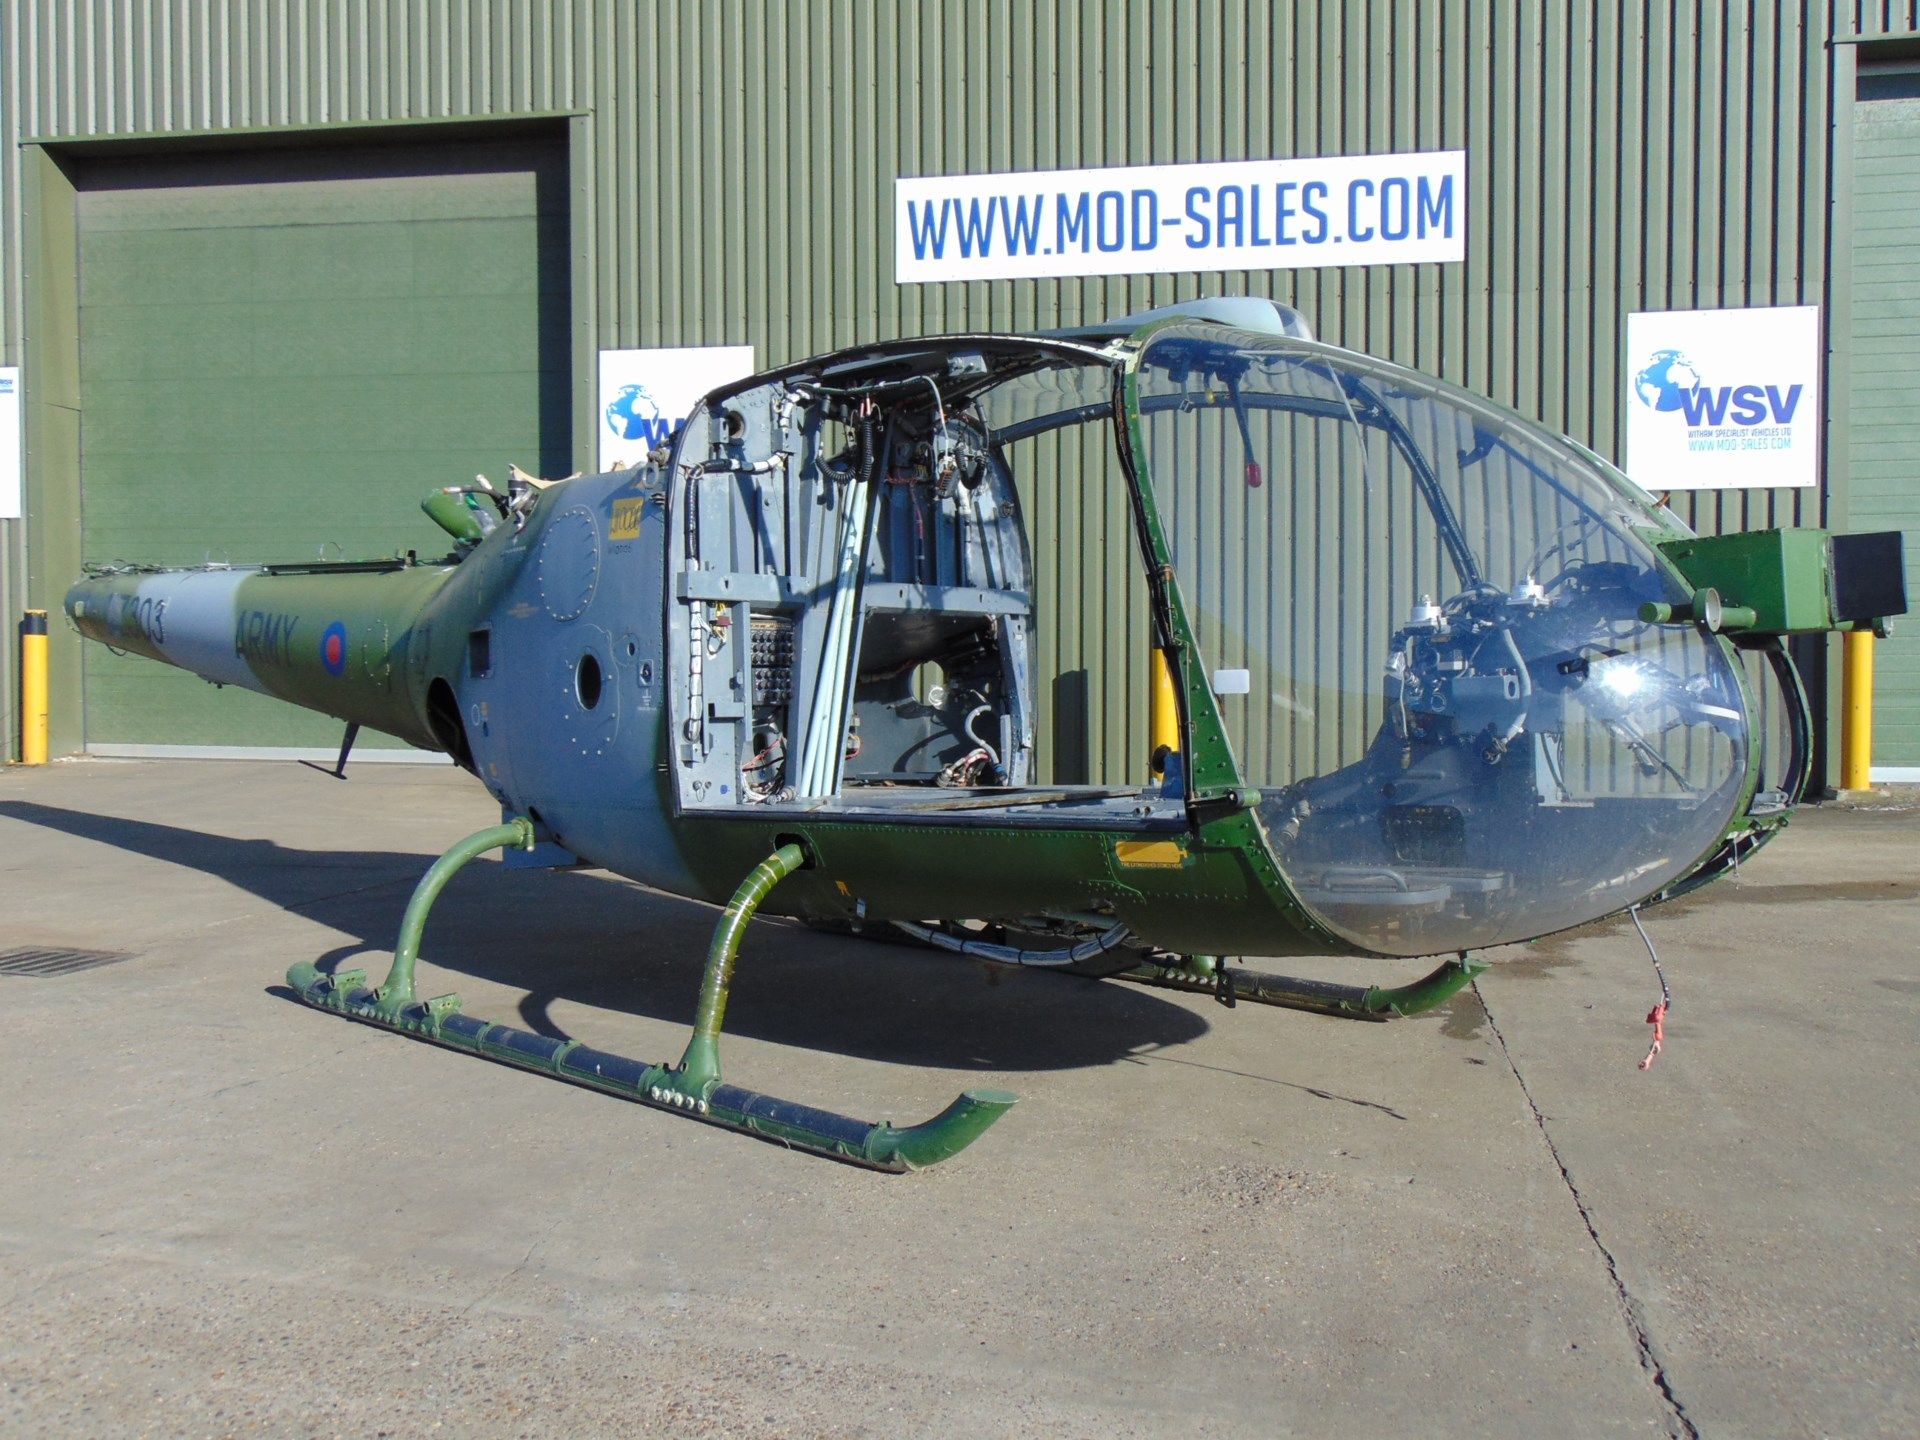 Gazelle AH 1 Turbine Helicopter Airframe (TAIL NUMBER XZ303) - Image 2 of 24